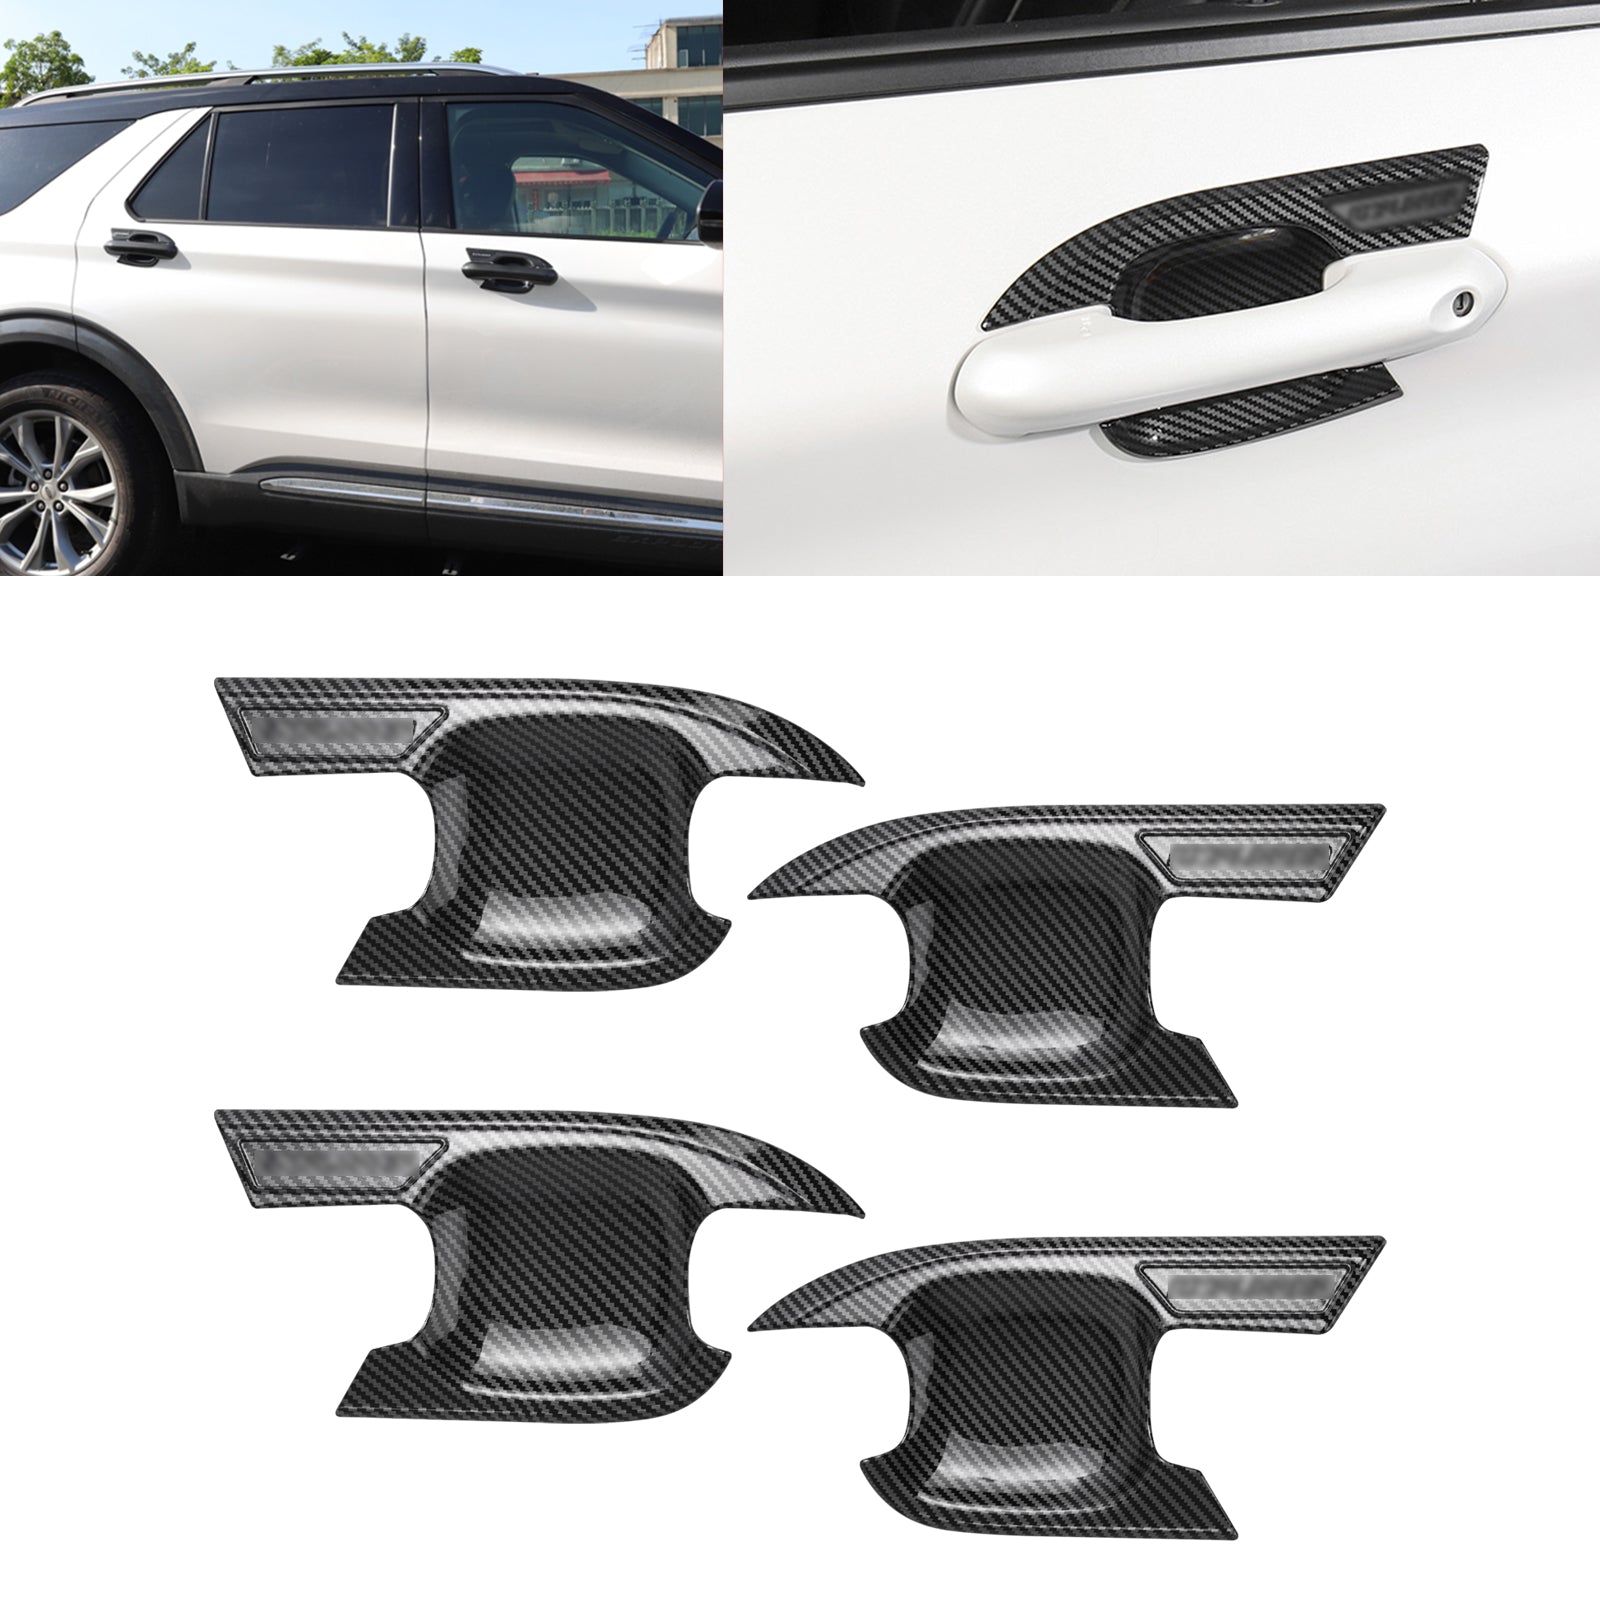 Mini Cooper Clubman Auto Accessory Carbon Fiber Car Door Handle Scratch  Cover Guards Universal Fit 4 Door Pack Made in USA New 